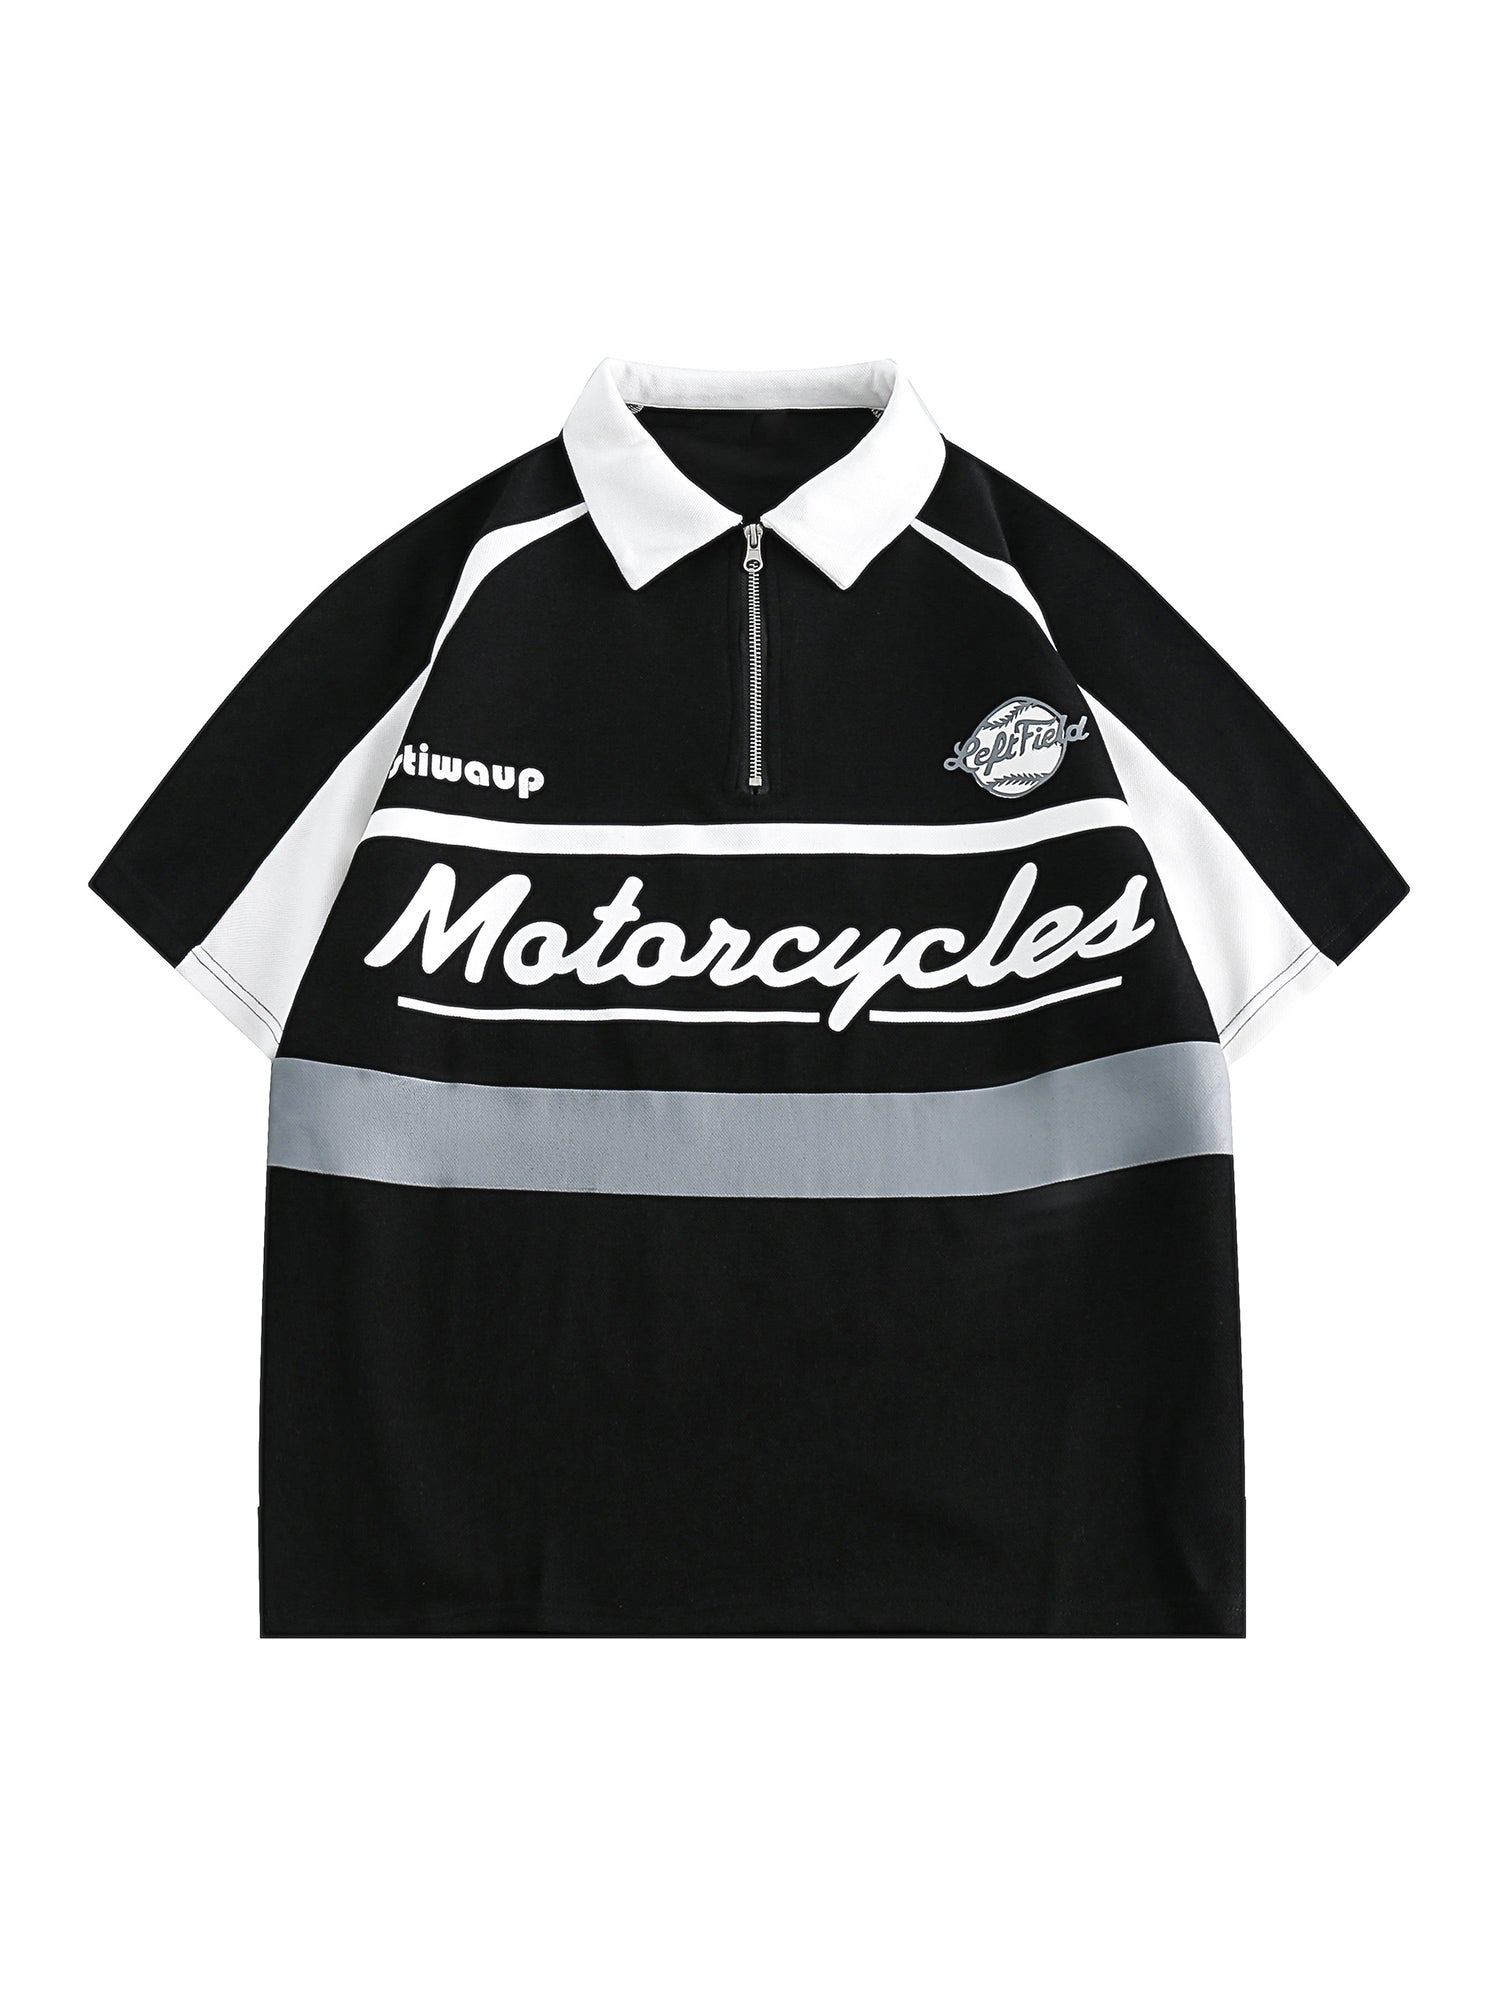 NB Motorcycles Patches Shirt